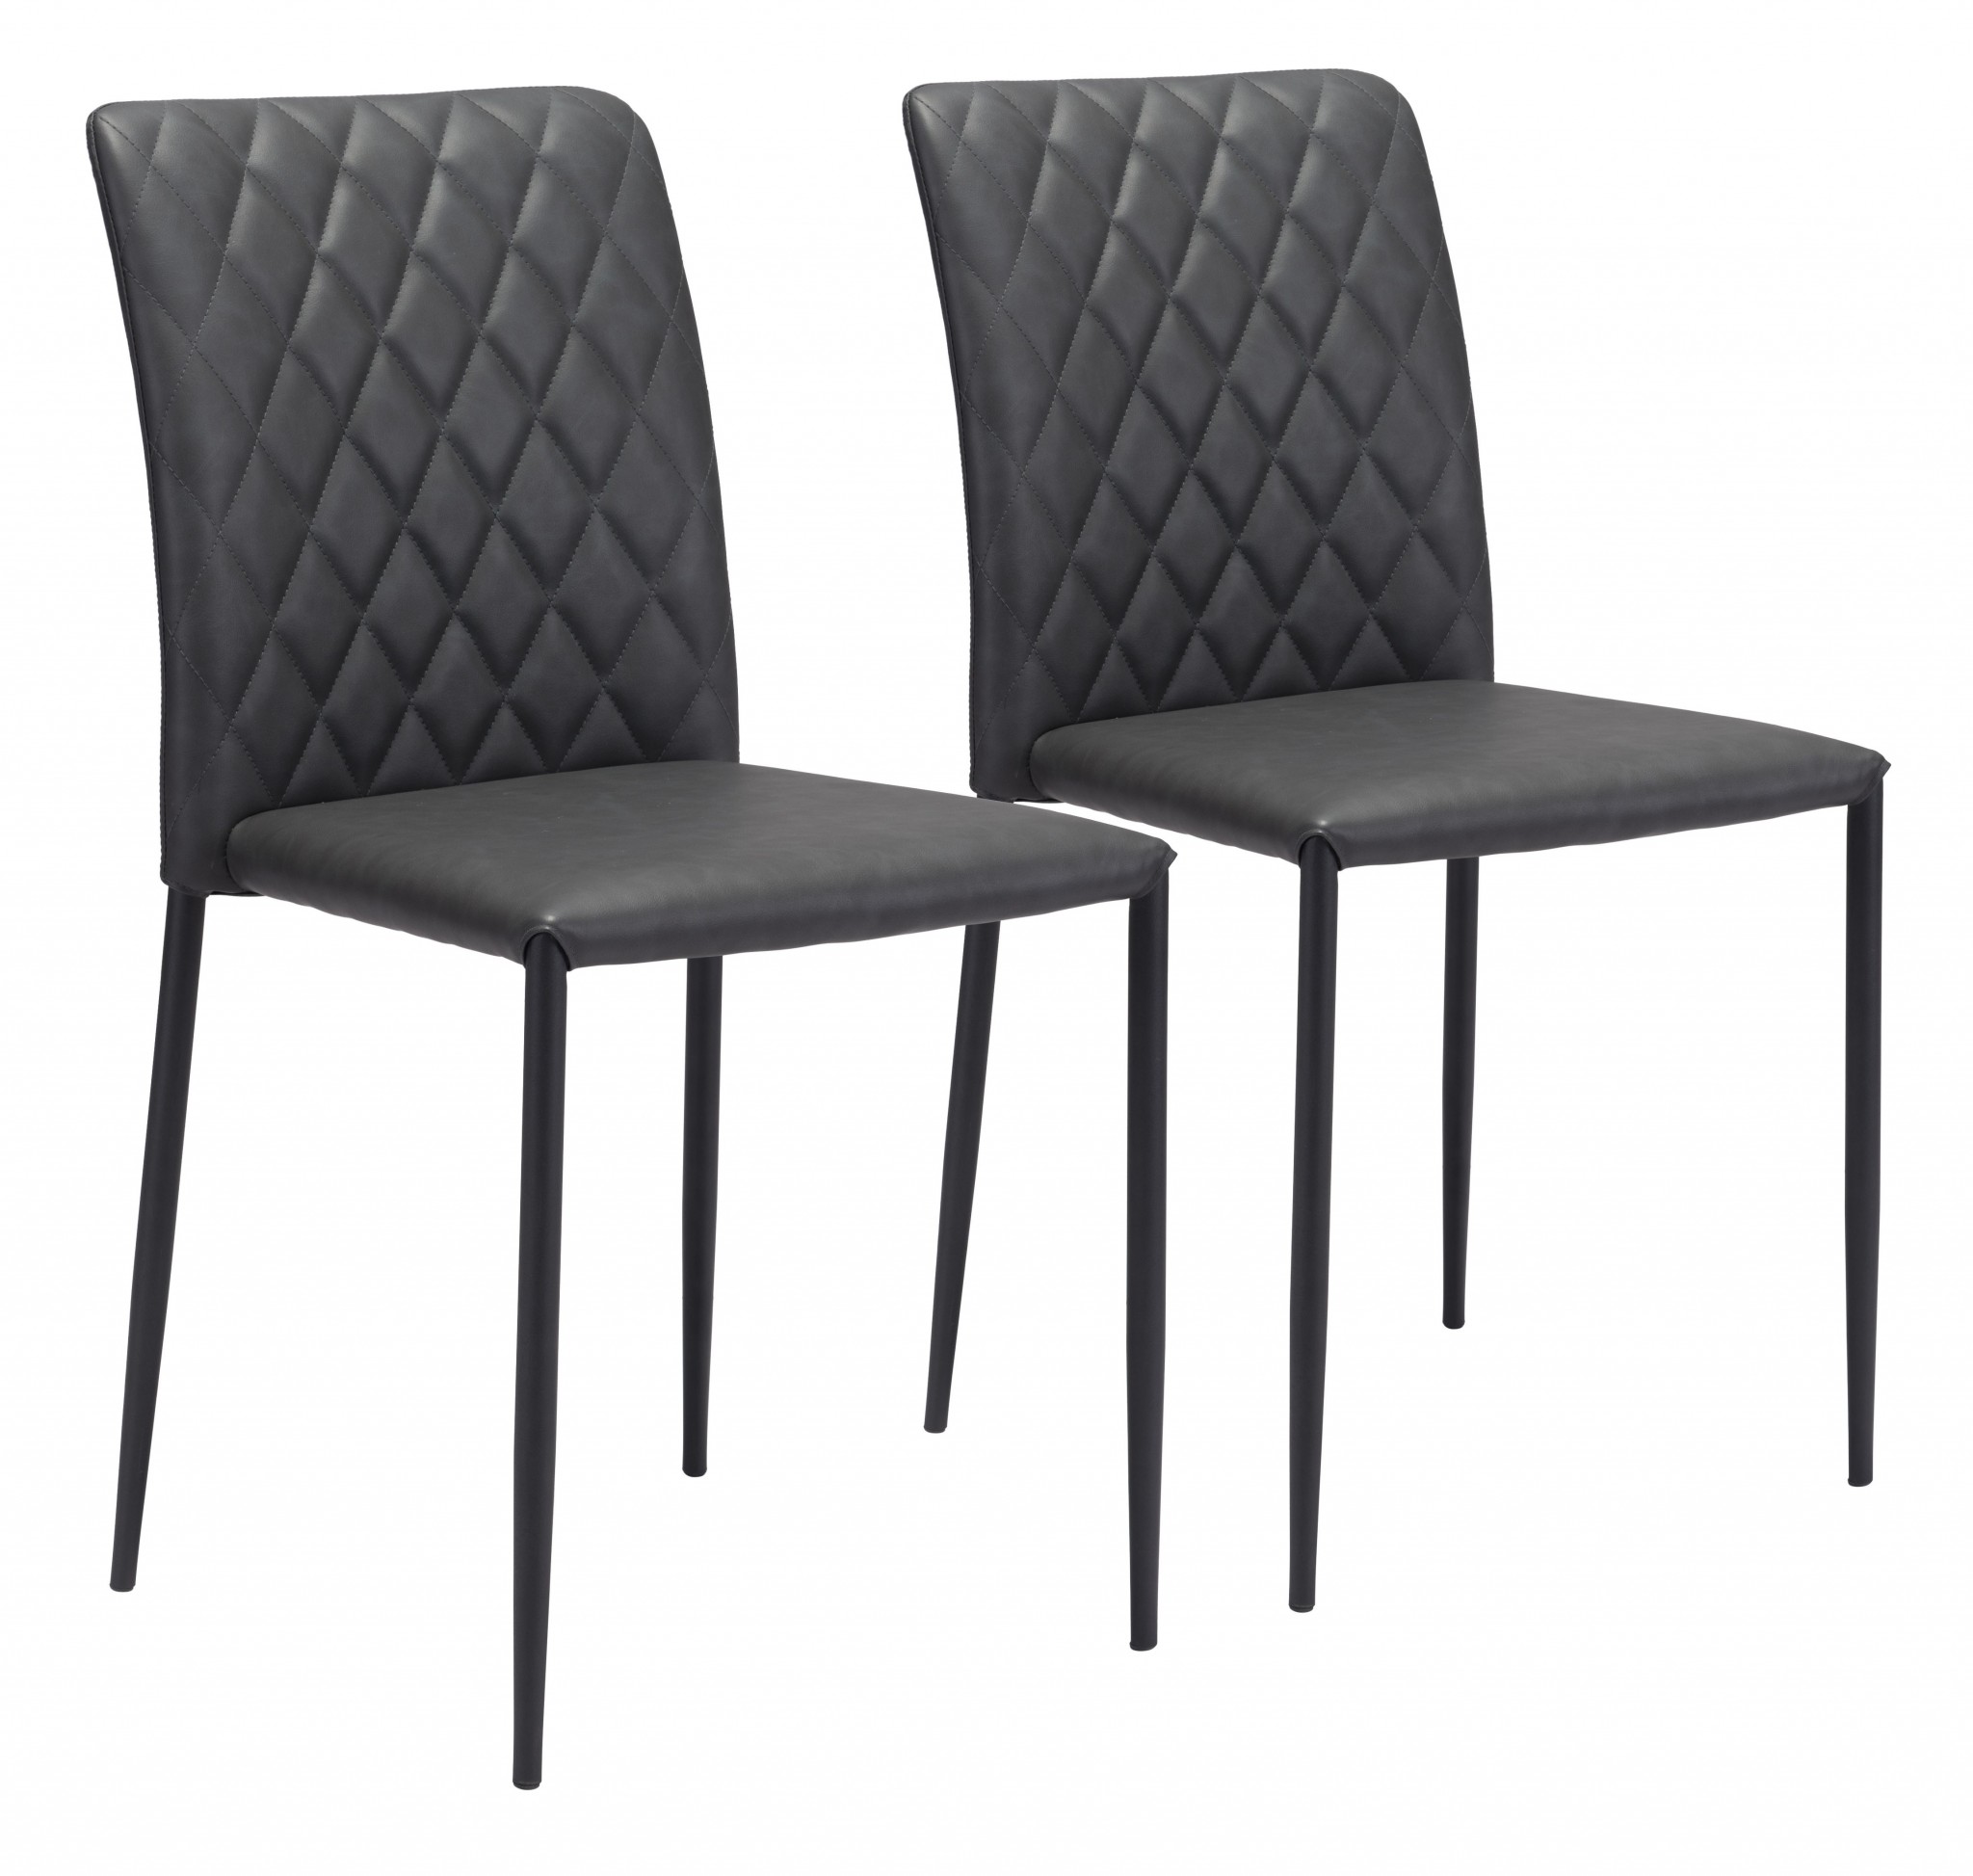 Set of Two Black Faux Leather Diamond Weave Dining Chairs